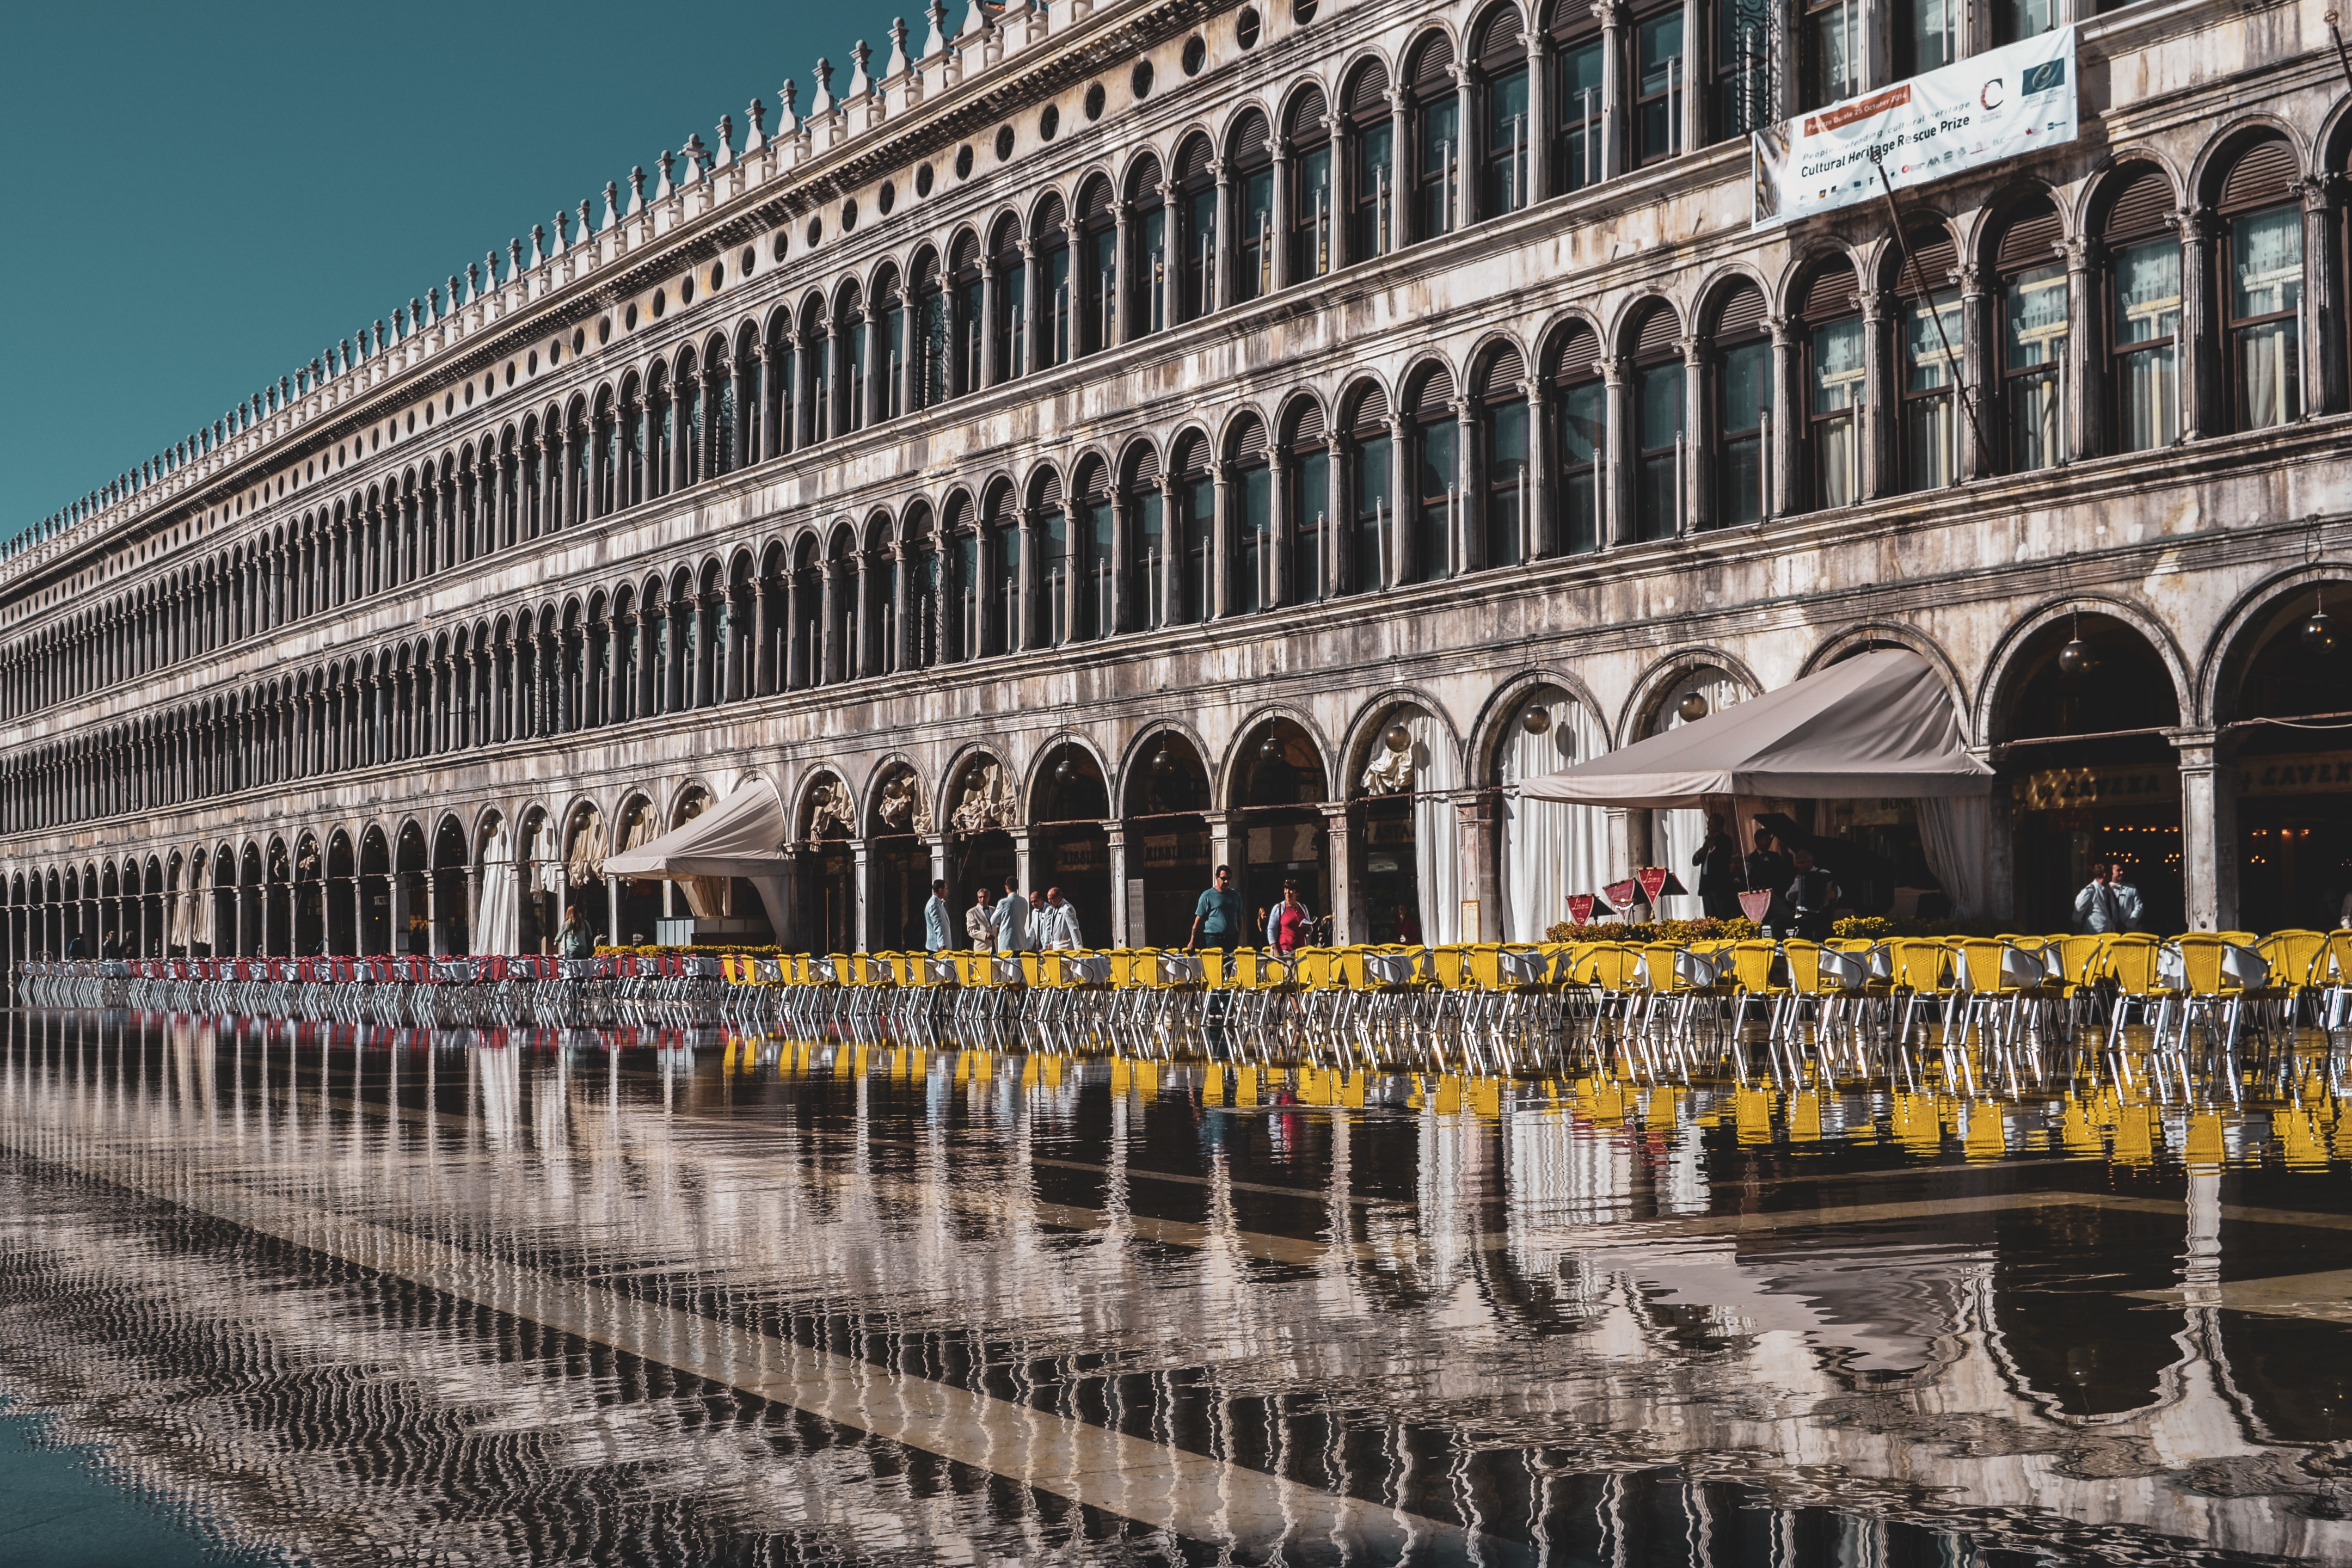 What to see in Venice